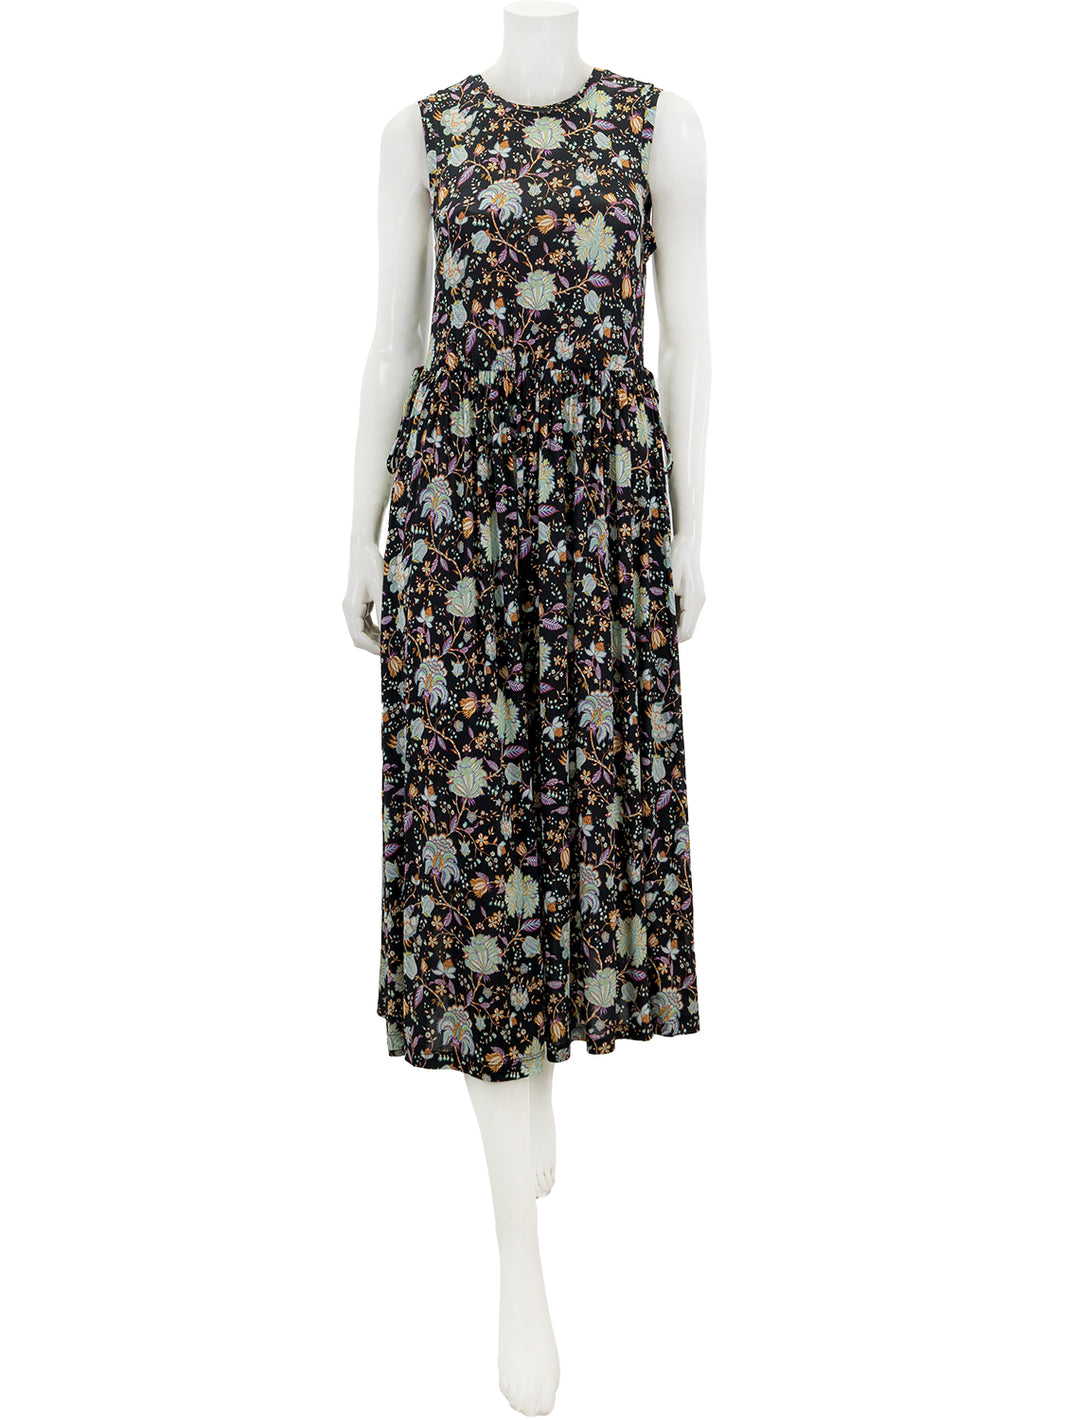 Front view of Ulla Johnson's clea dress in nuit.